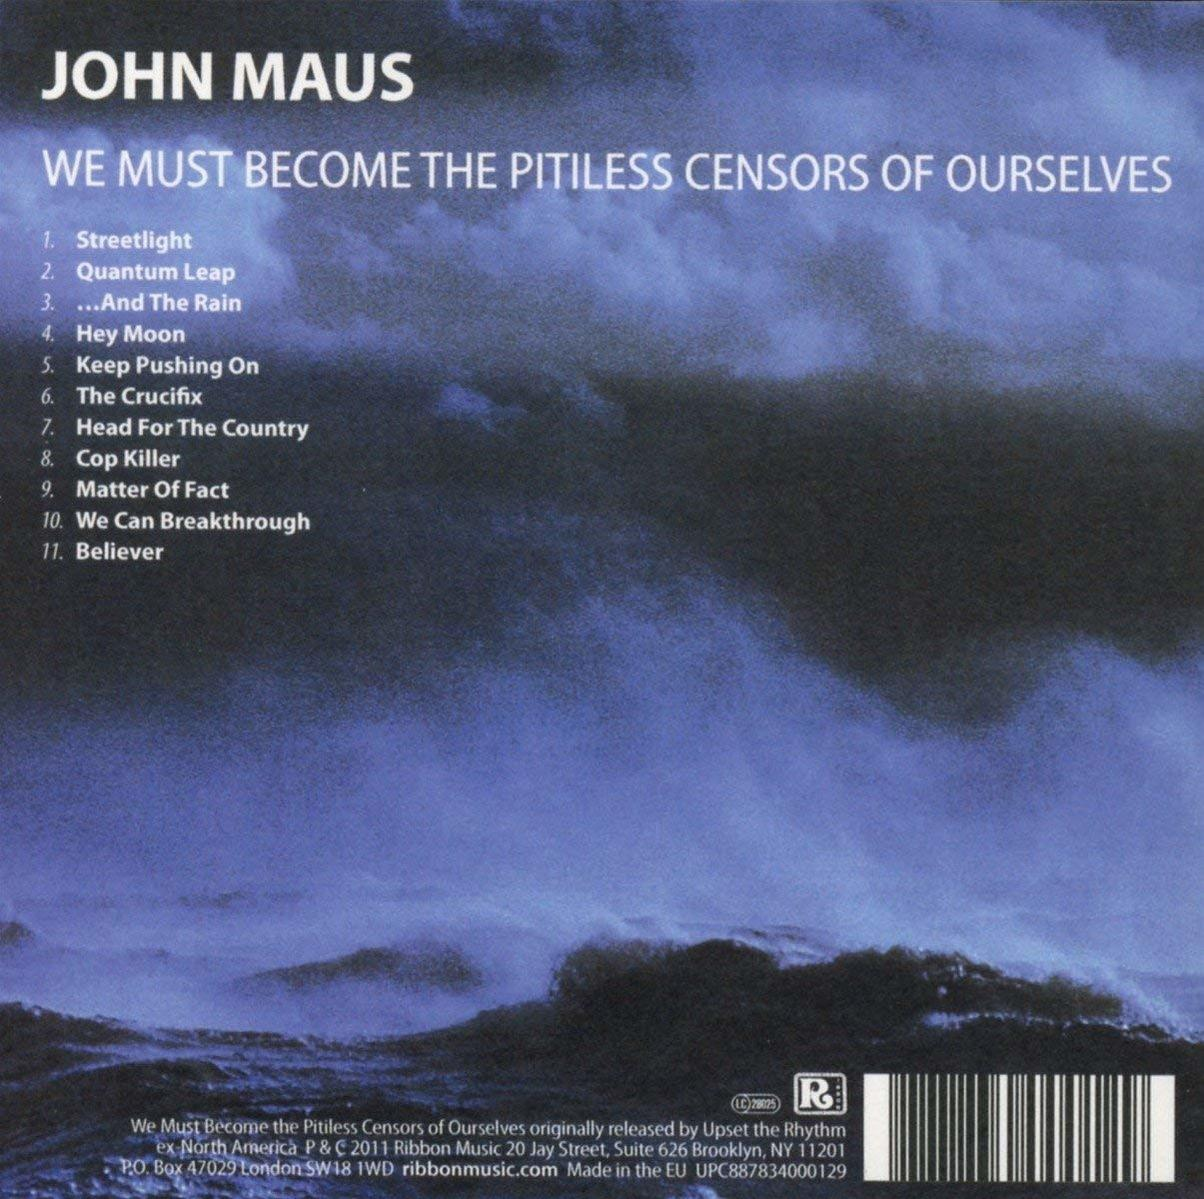 (CD) Must Become Pitiless Ourselves Maus - Of Censors John The - We